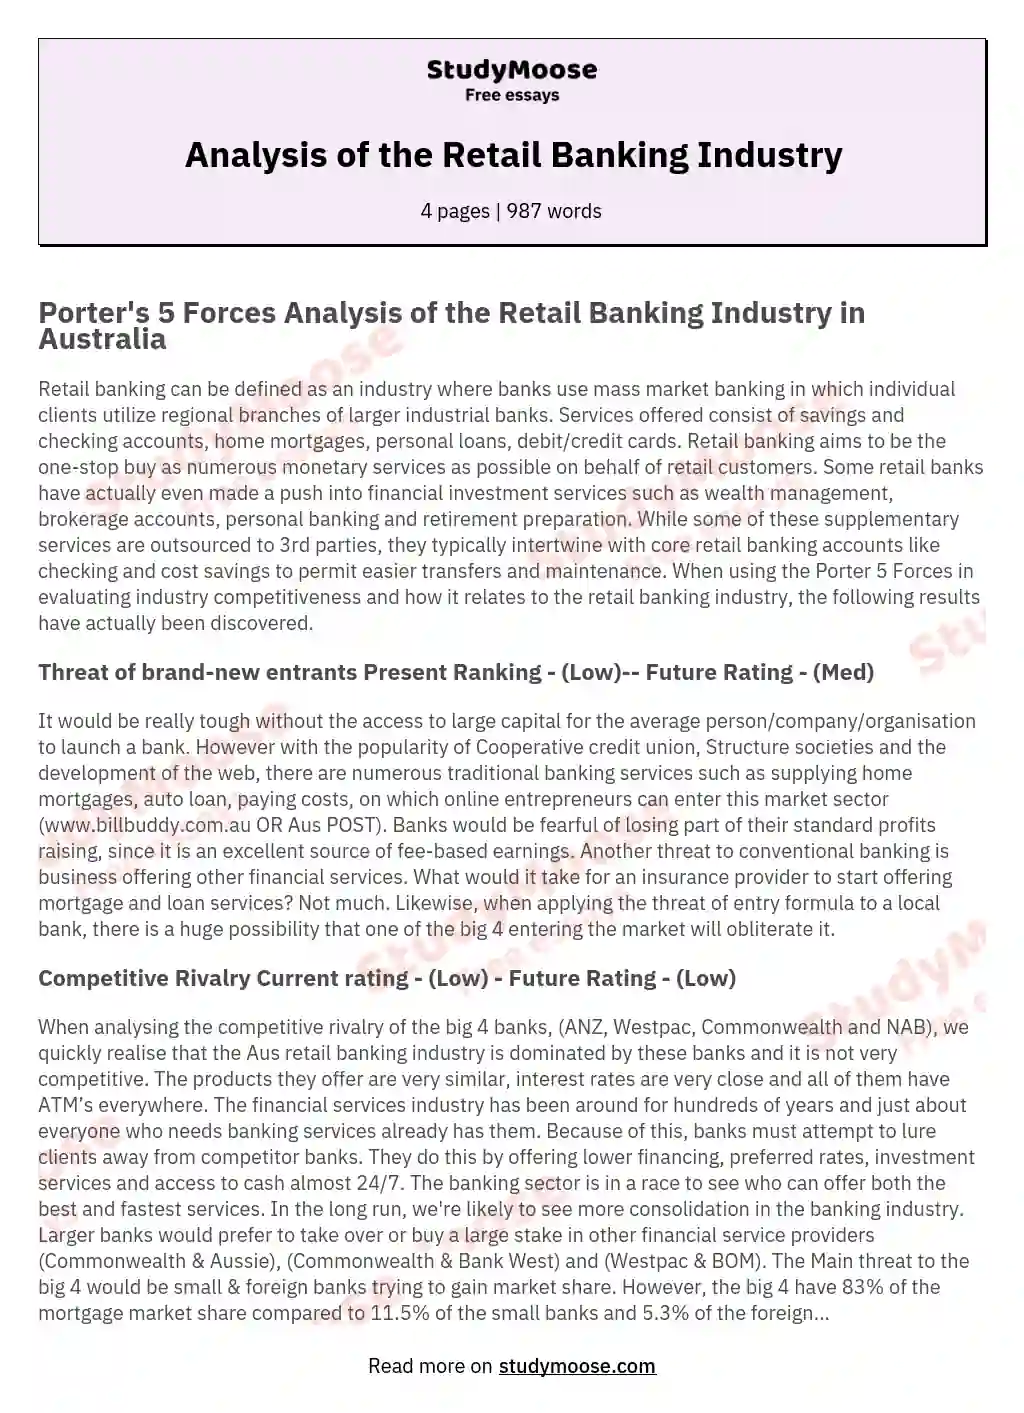 Analysis of the Retail Banking Industry essay